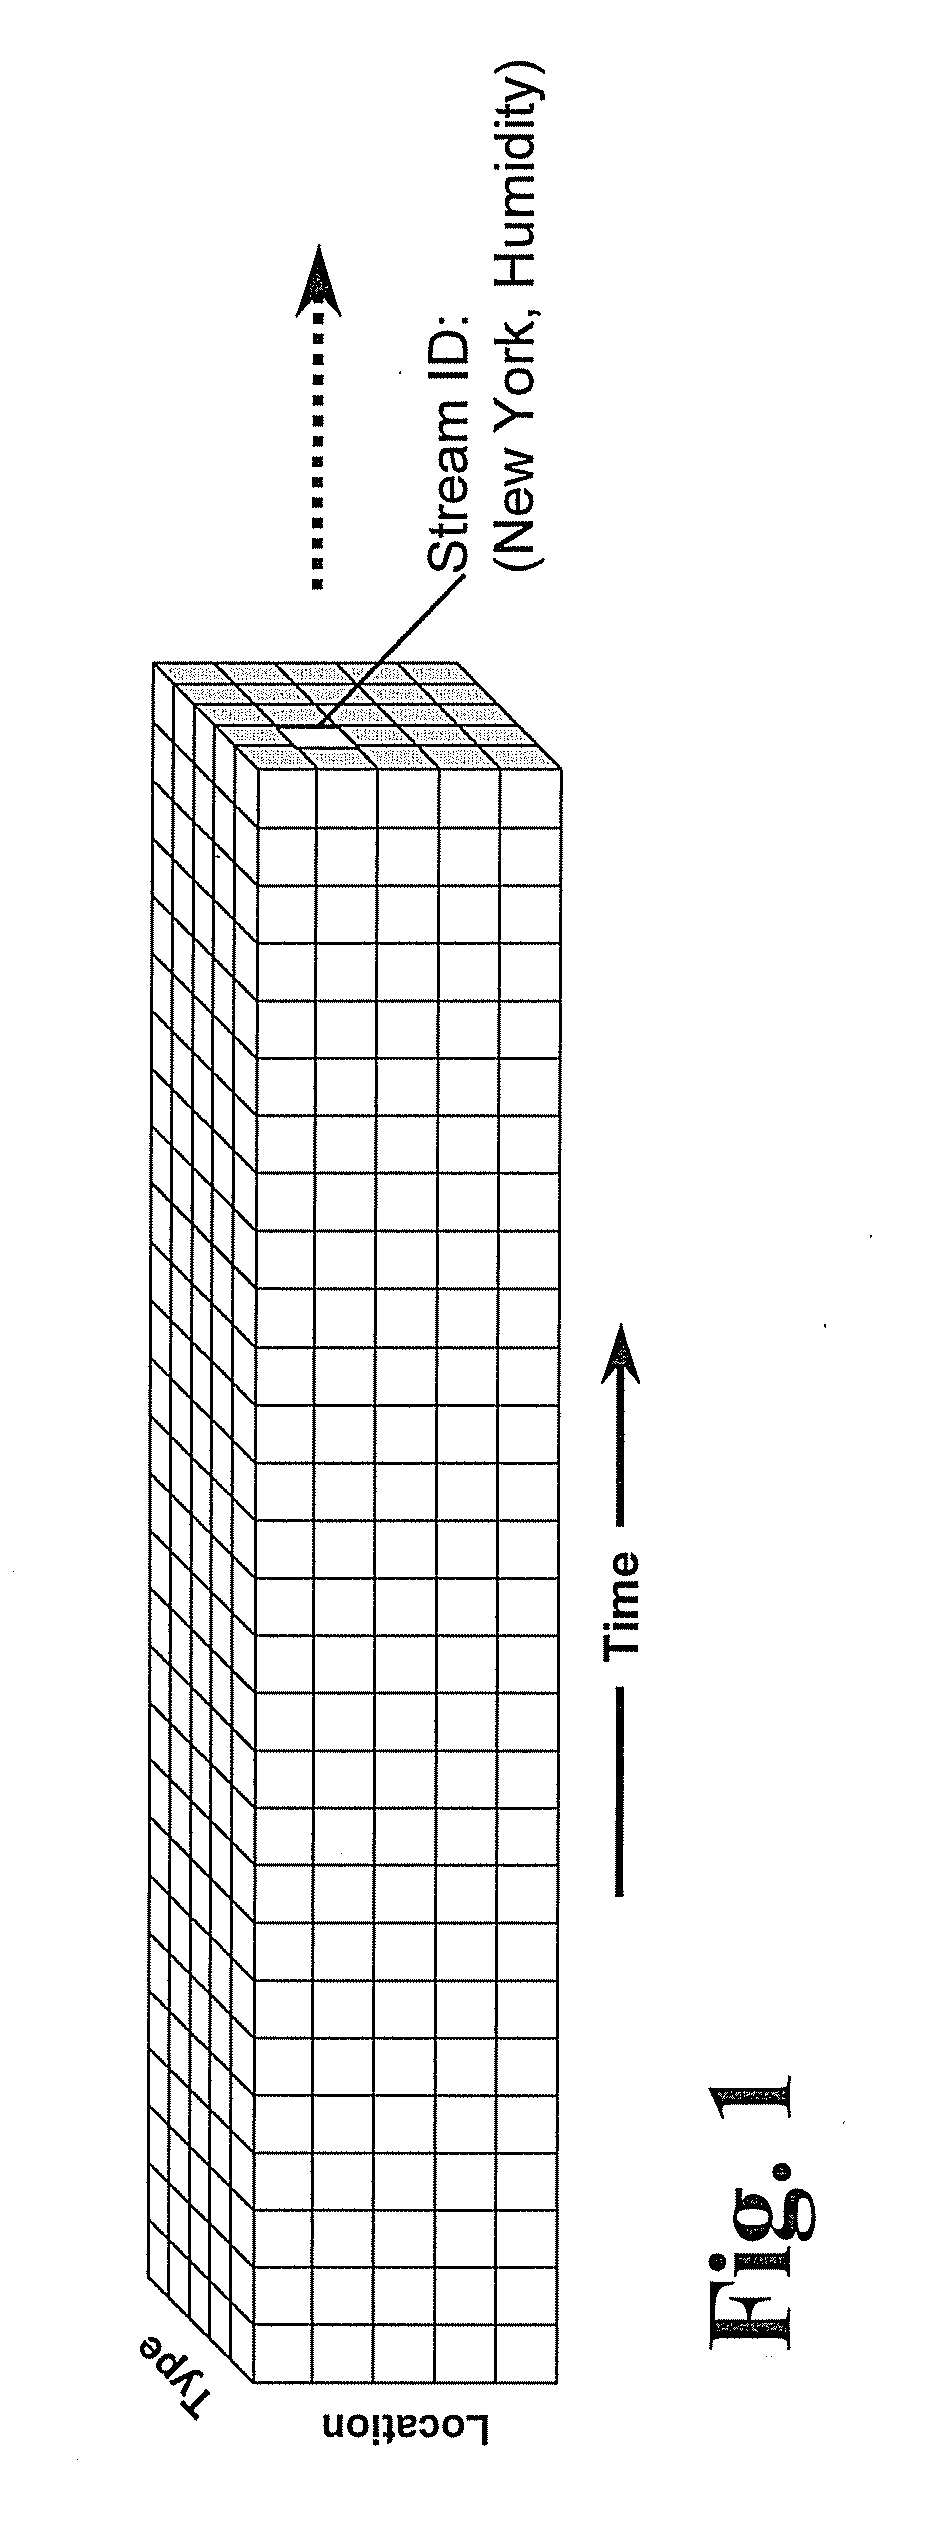 Systems and methods for simultaneous summarization of data cube streams